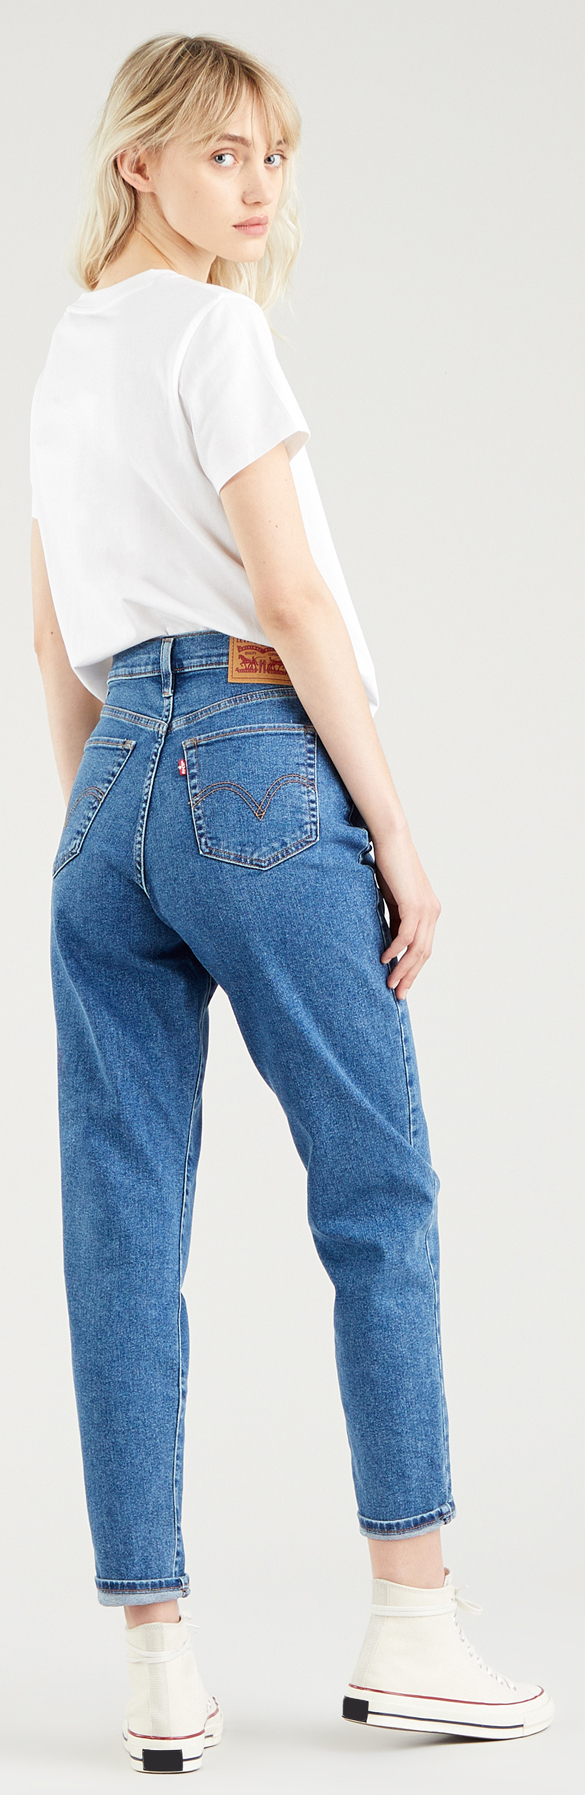 VAQUERO MUJER LEVIS HIGH WAISTED MOM JEAN FIT THE - Korner